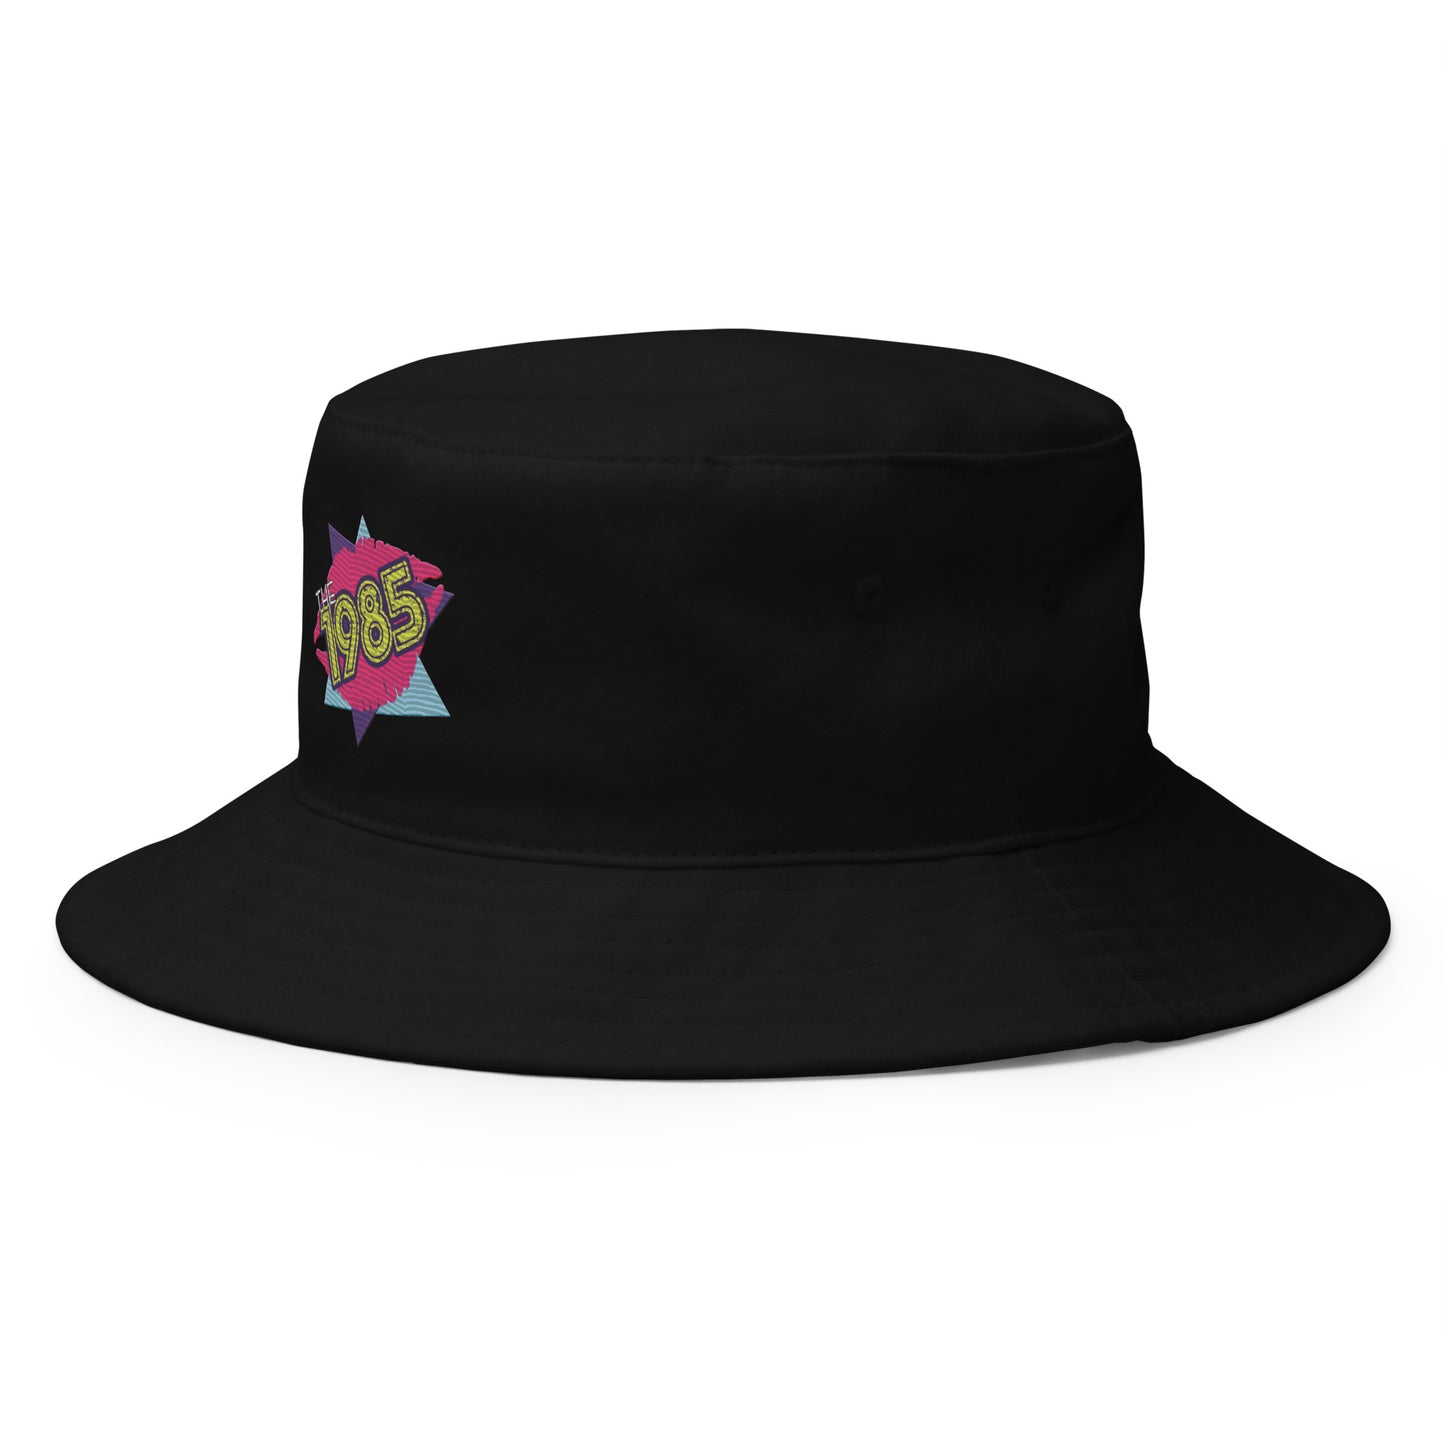 The 1985 Embroidered Logo Bucket Hat